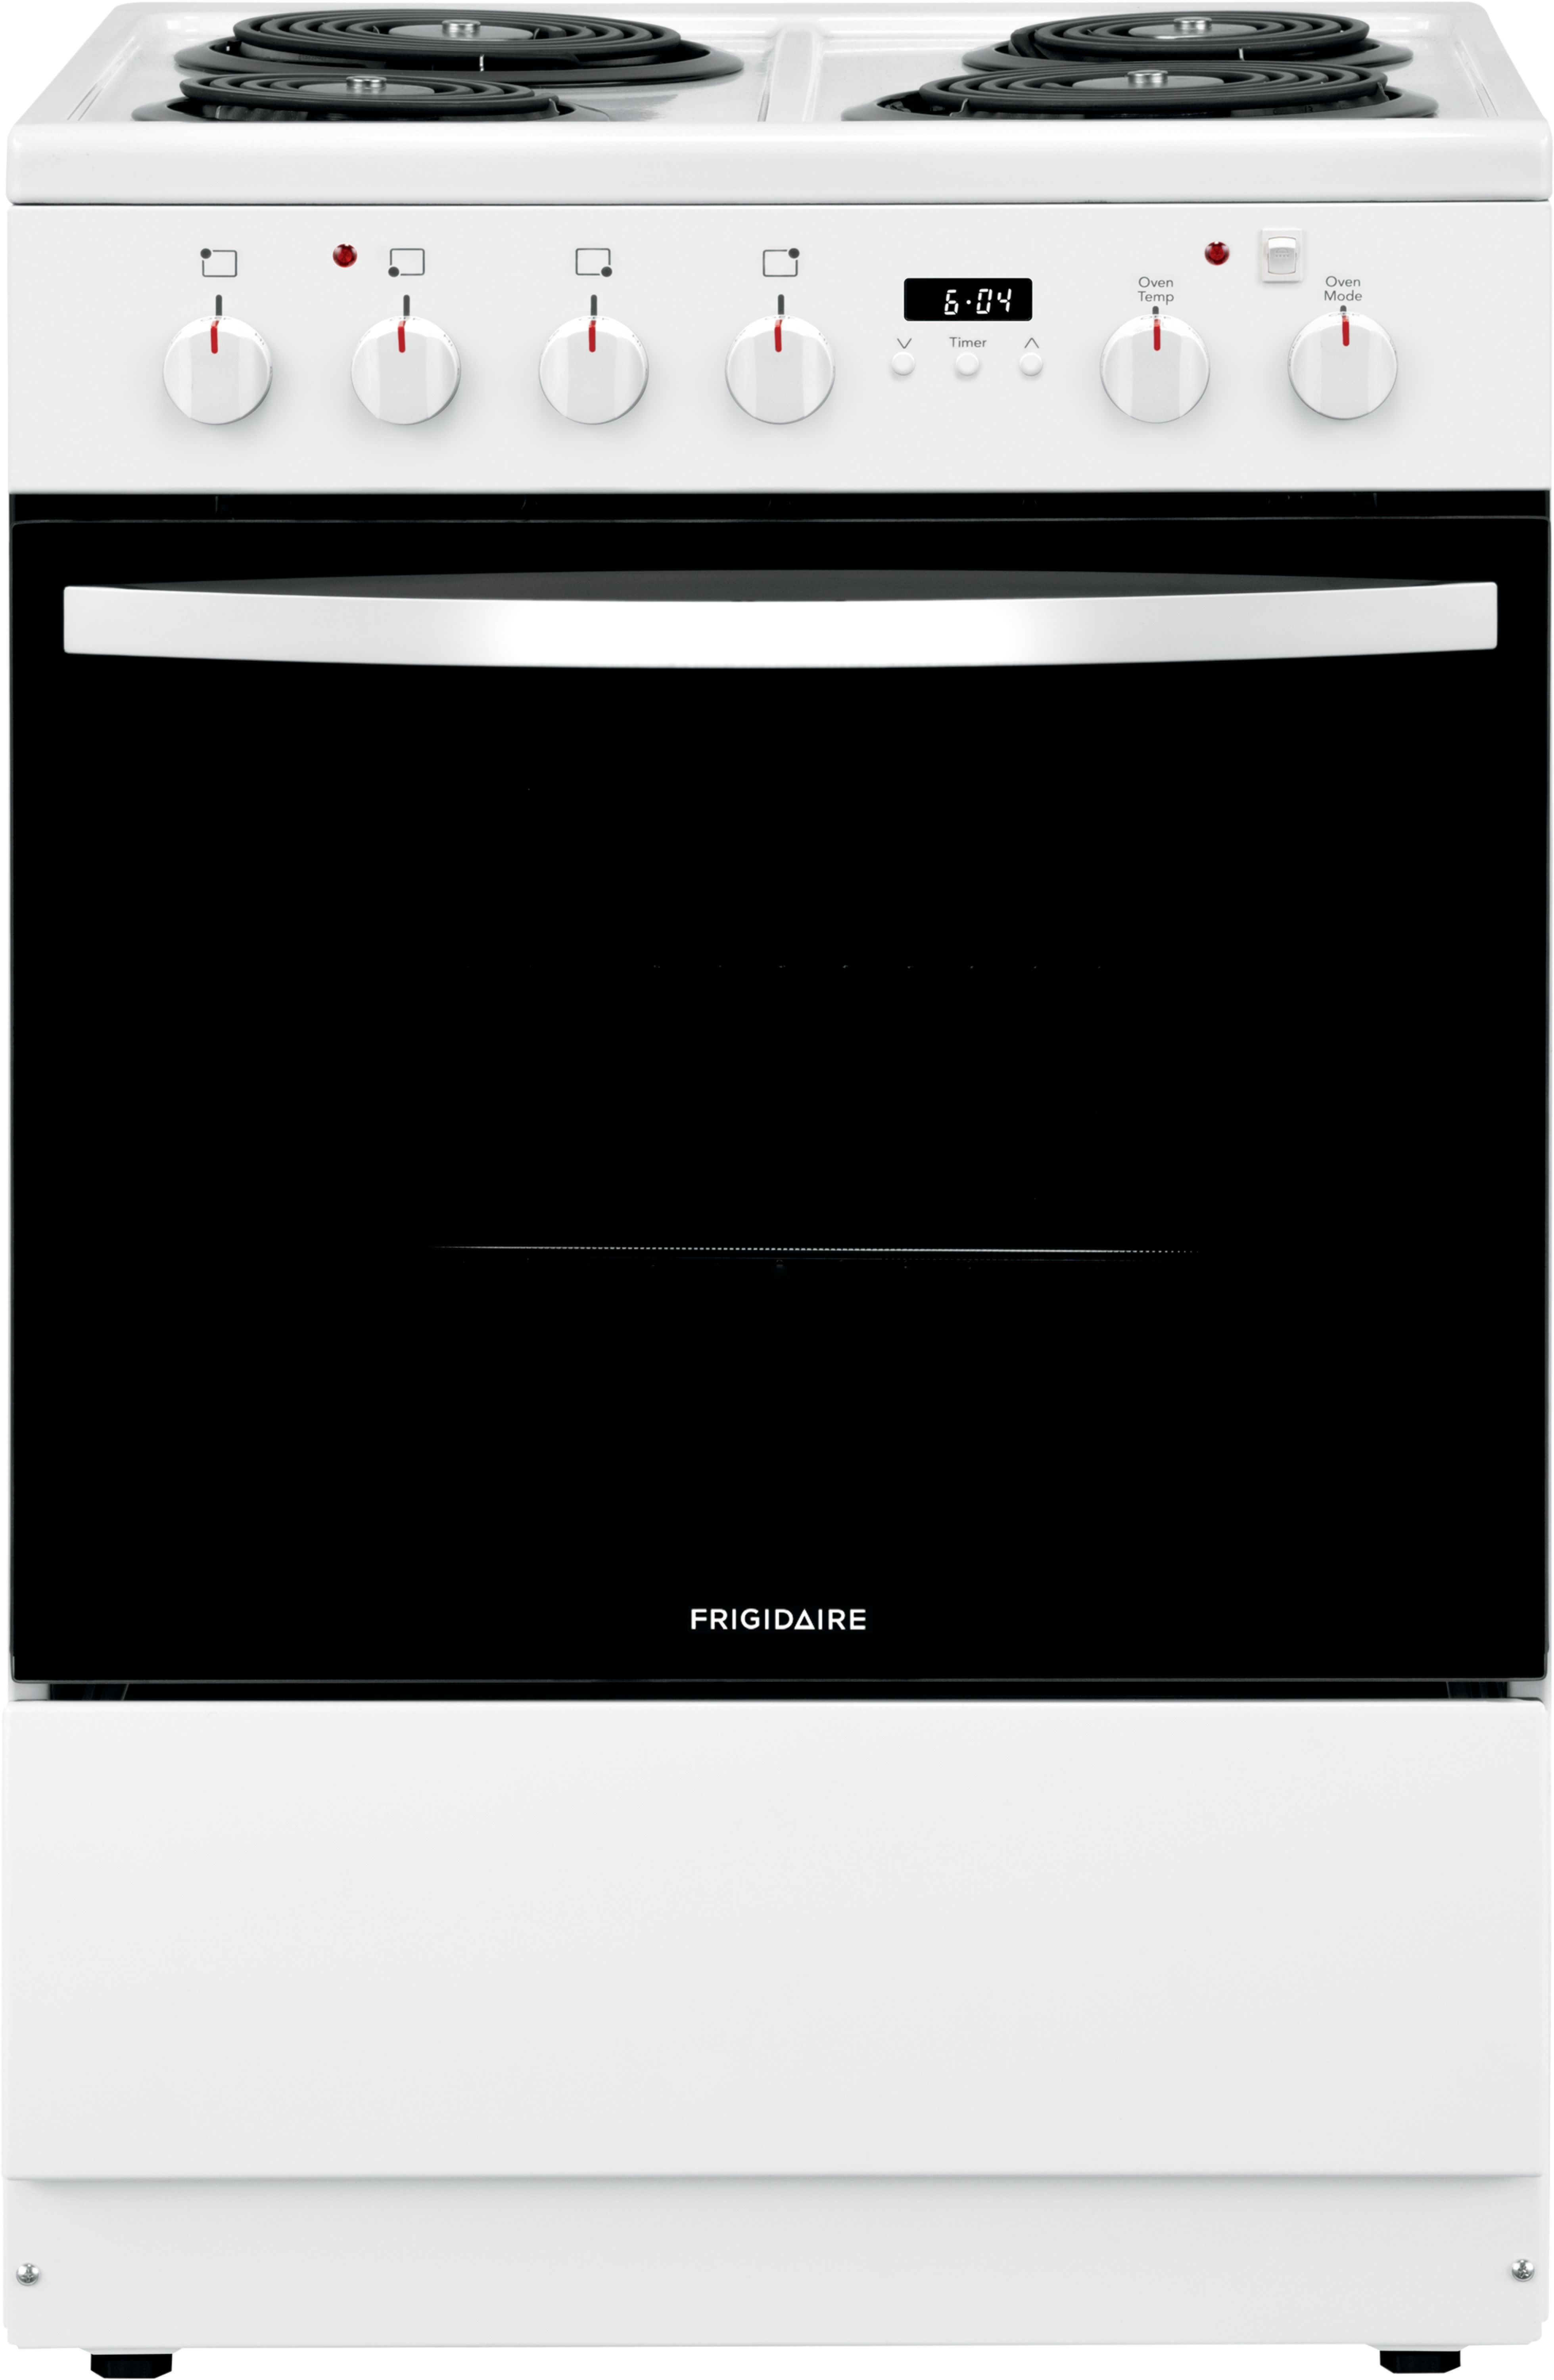 Frigidaire® 24" Stainless Steel Free Standing Electric Range-FFEH2422US